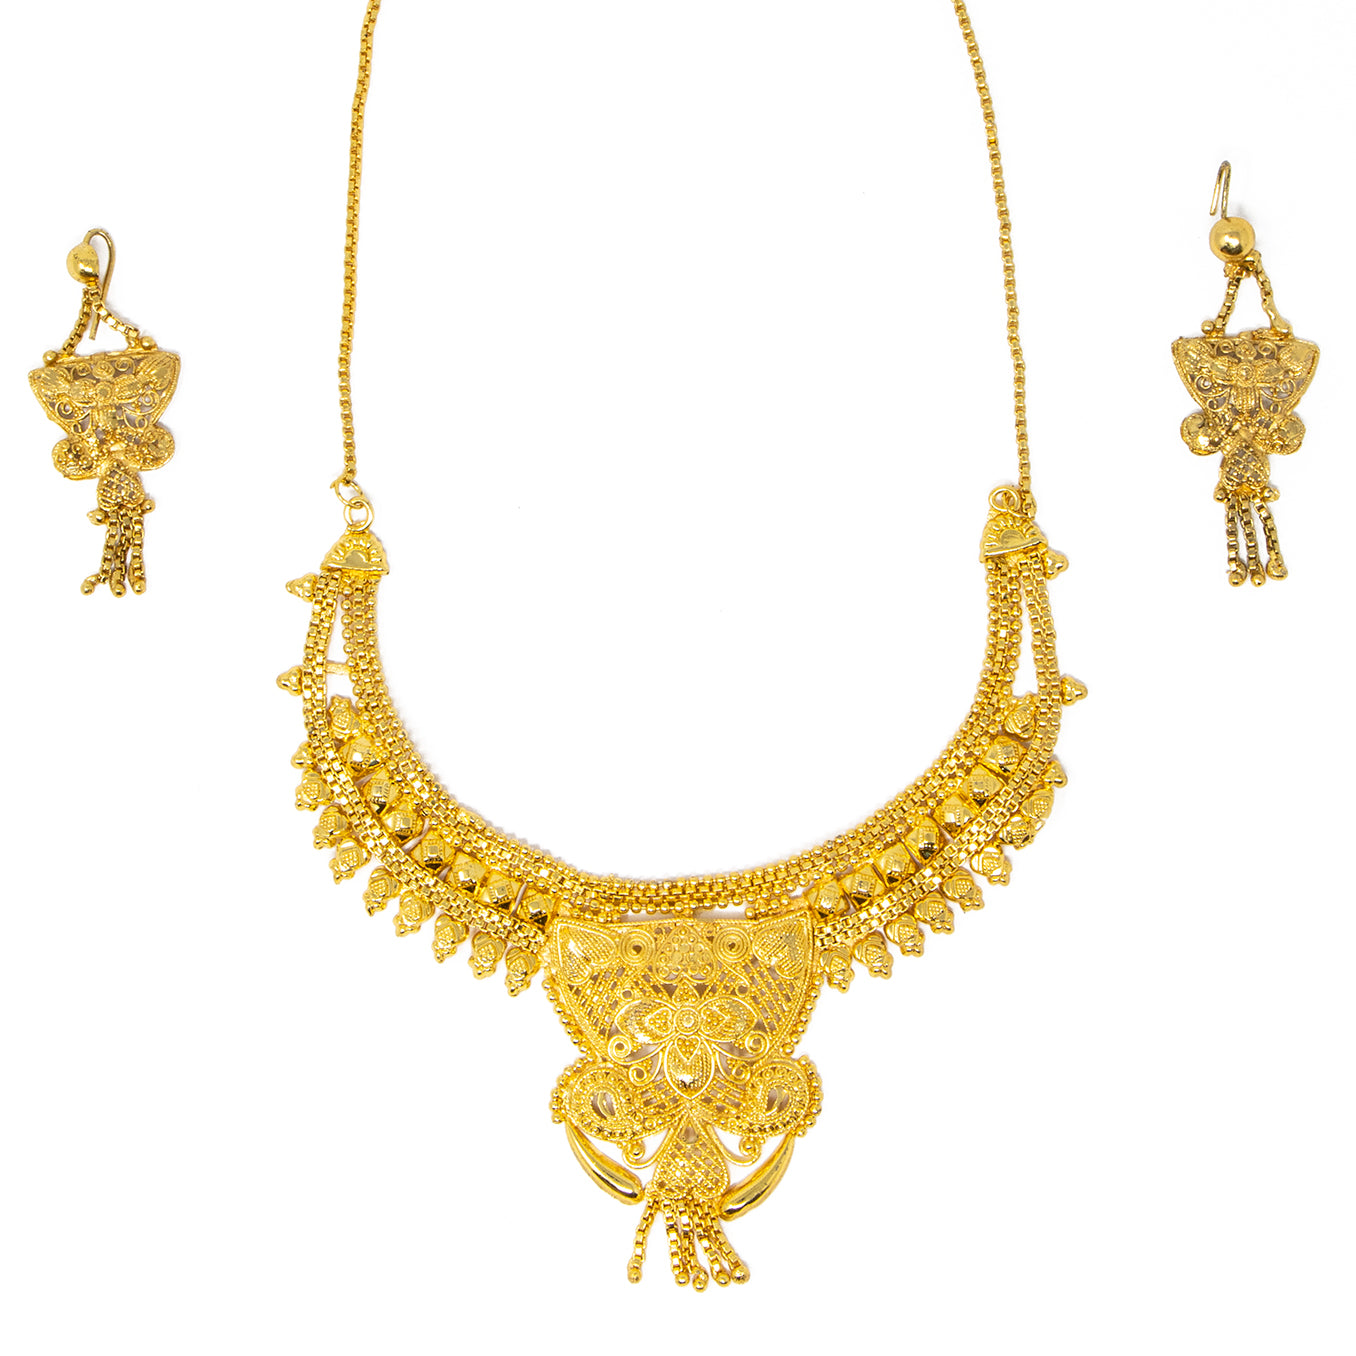 3 piece set Gold, Silver Necklace, includes earrings and bindi 